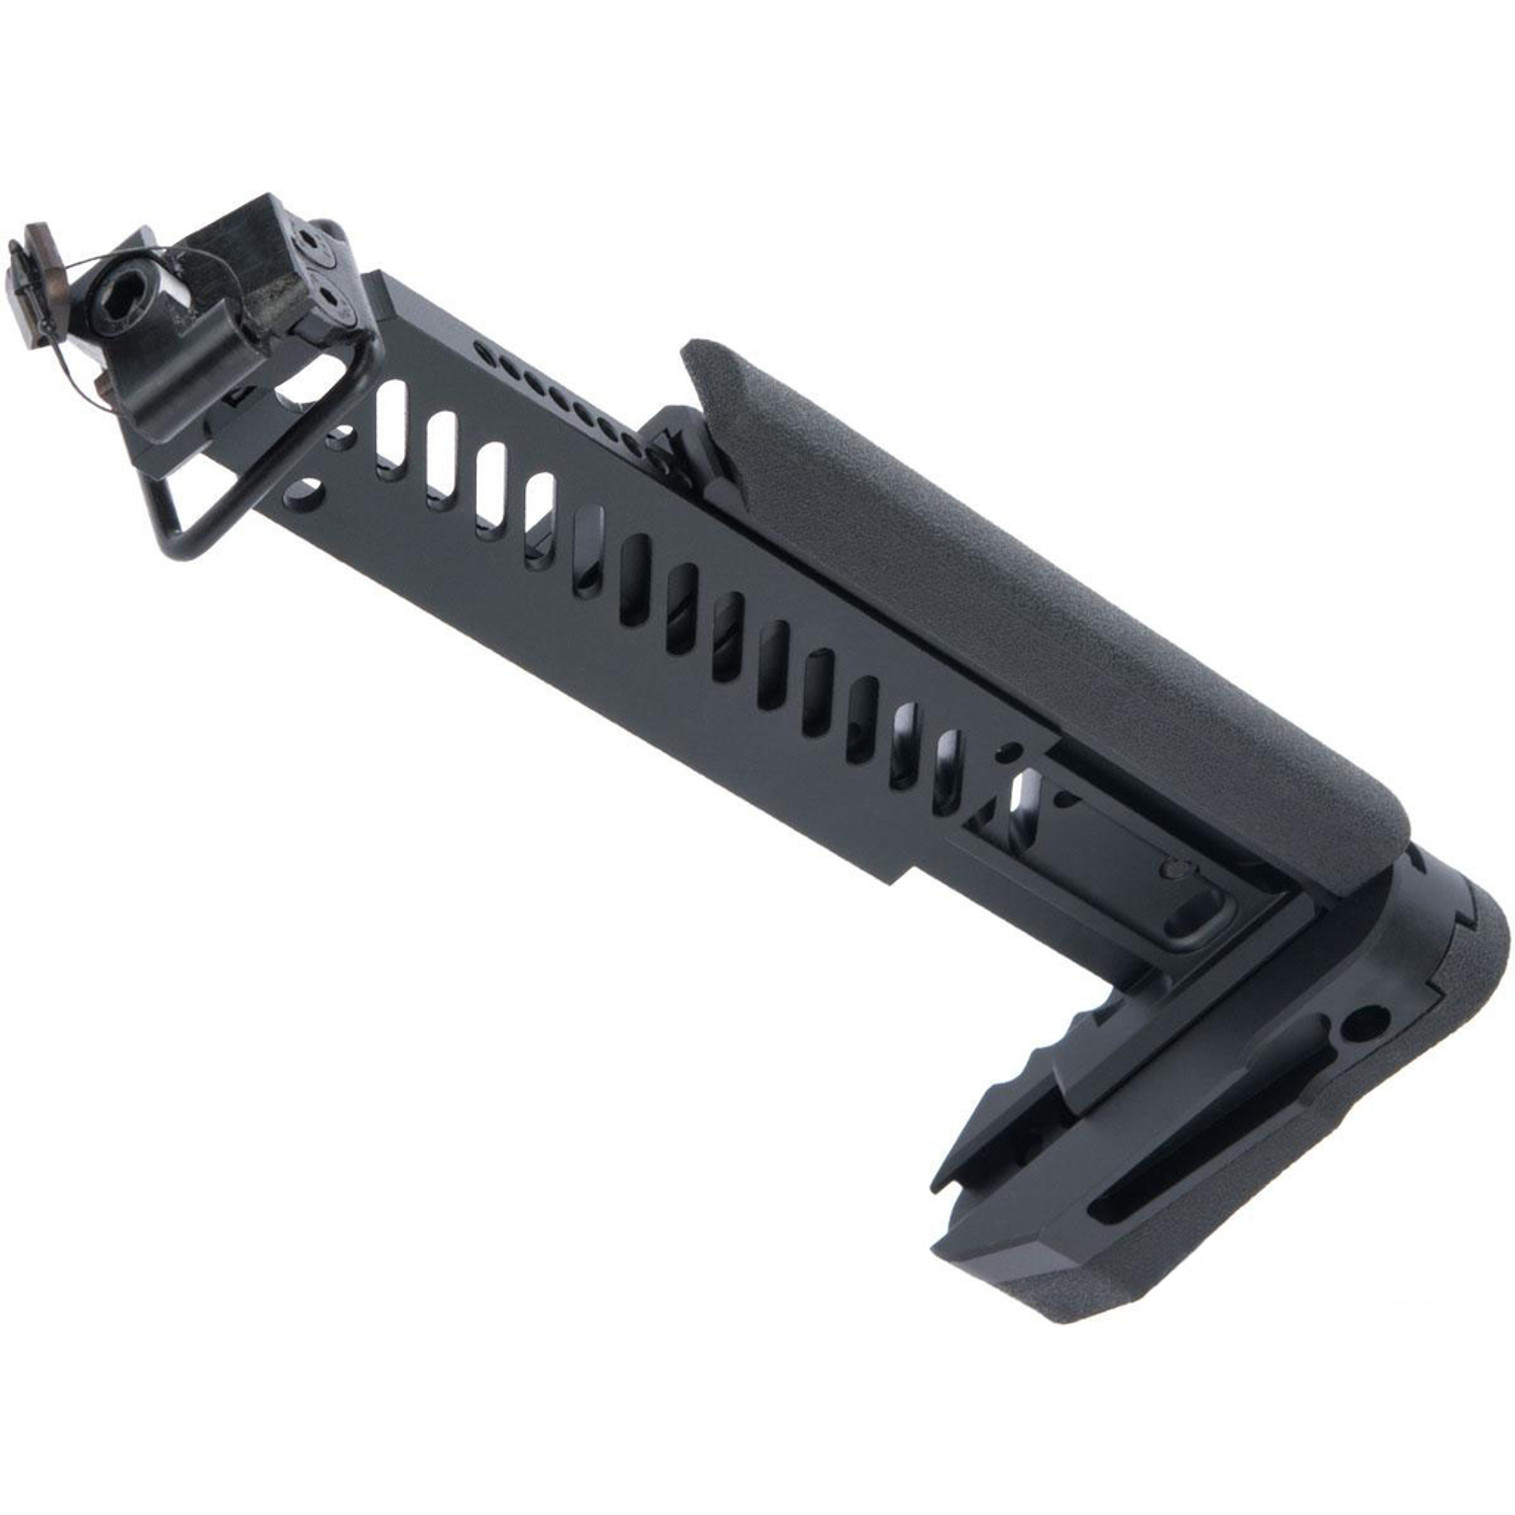 LCT Airsoft Z Series ZPT-1 Folding Buttstock for LCT AK47/74/105 Series Airsoft Rifles